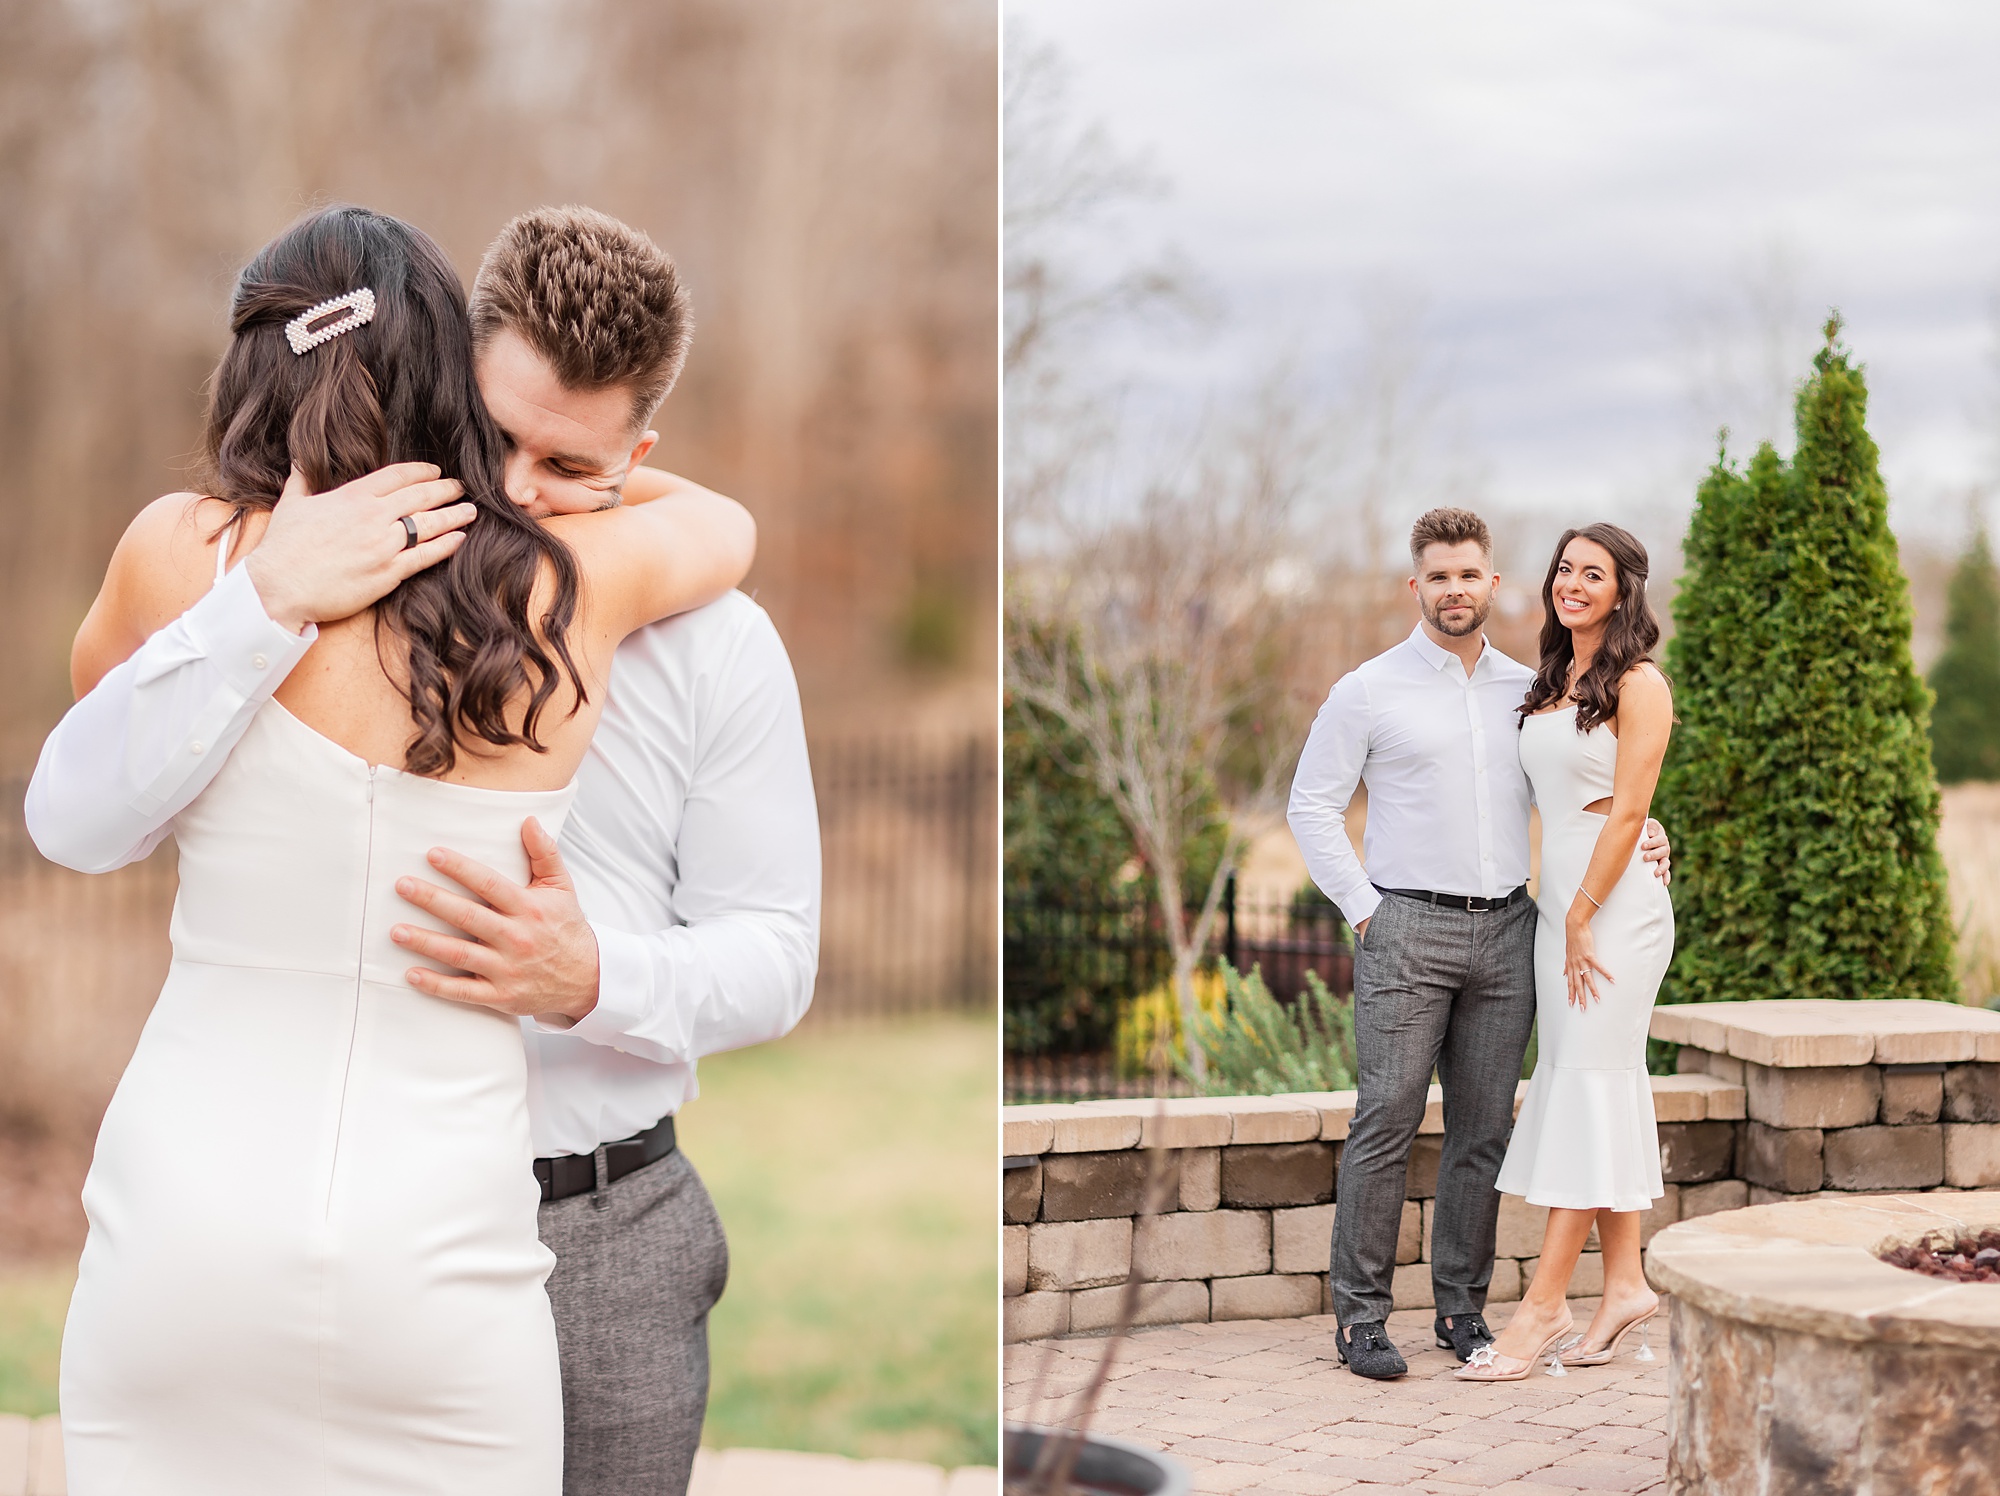 groom hugs bride-to-be during first look before intimate at-home elopement